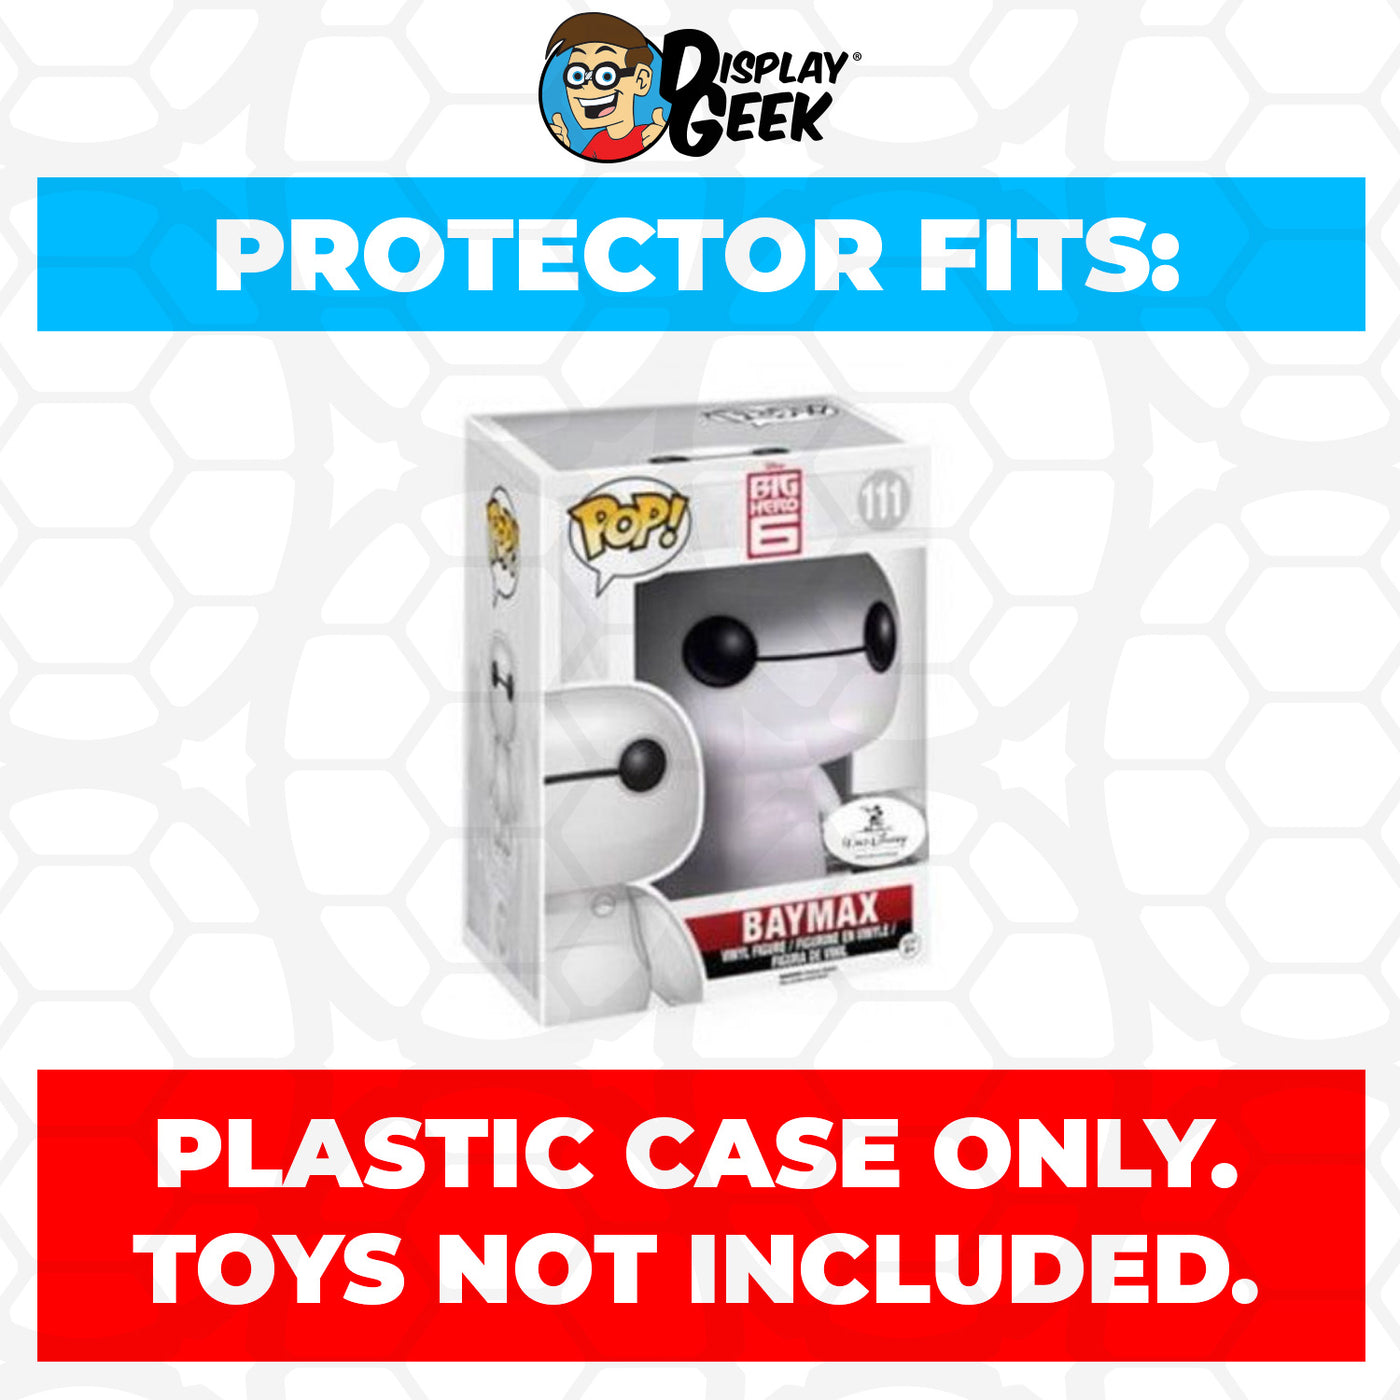 Pop Protector for 6 inch Baymax Disney Animation Studios #111 Super Funko Pop on The Protector Guide App by Display Geek